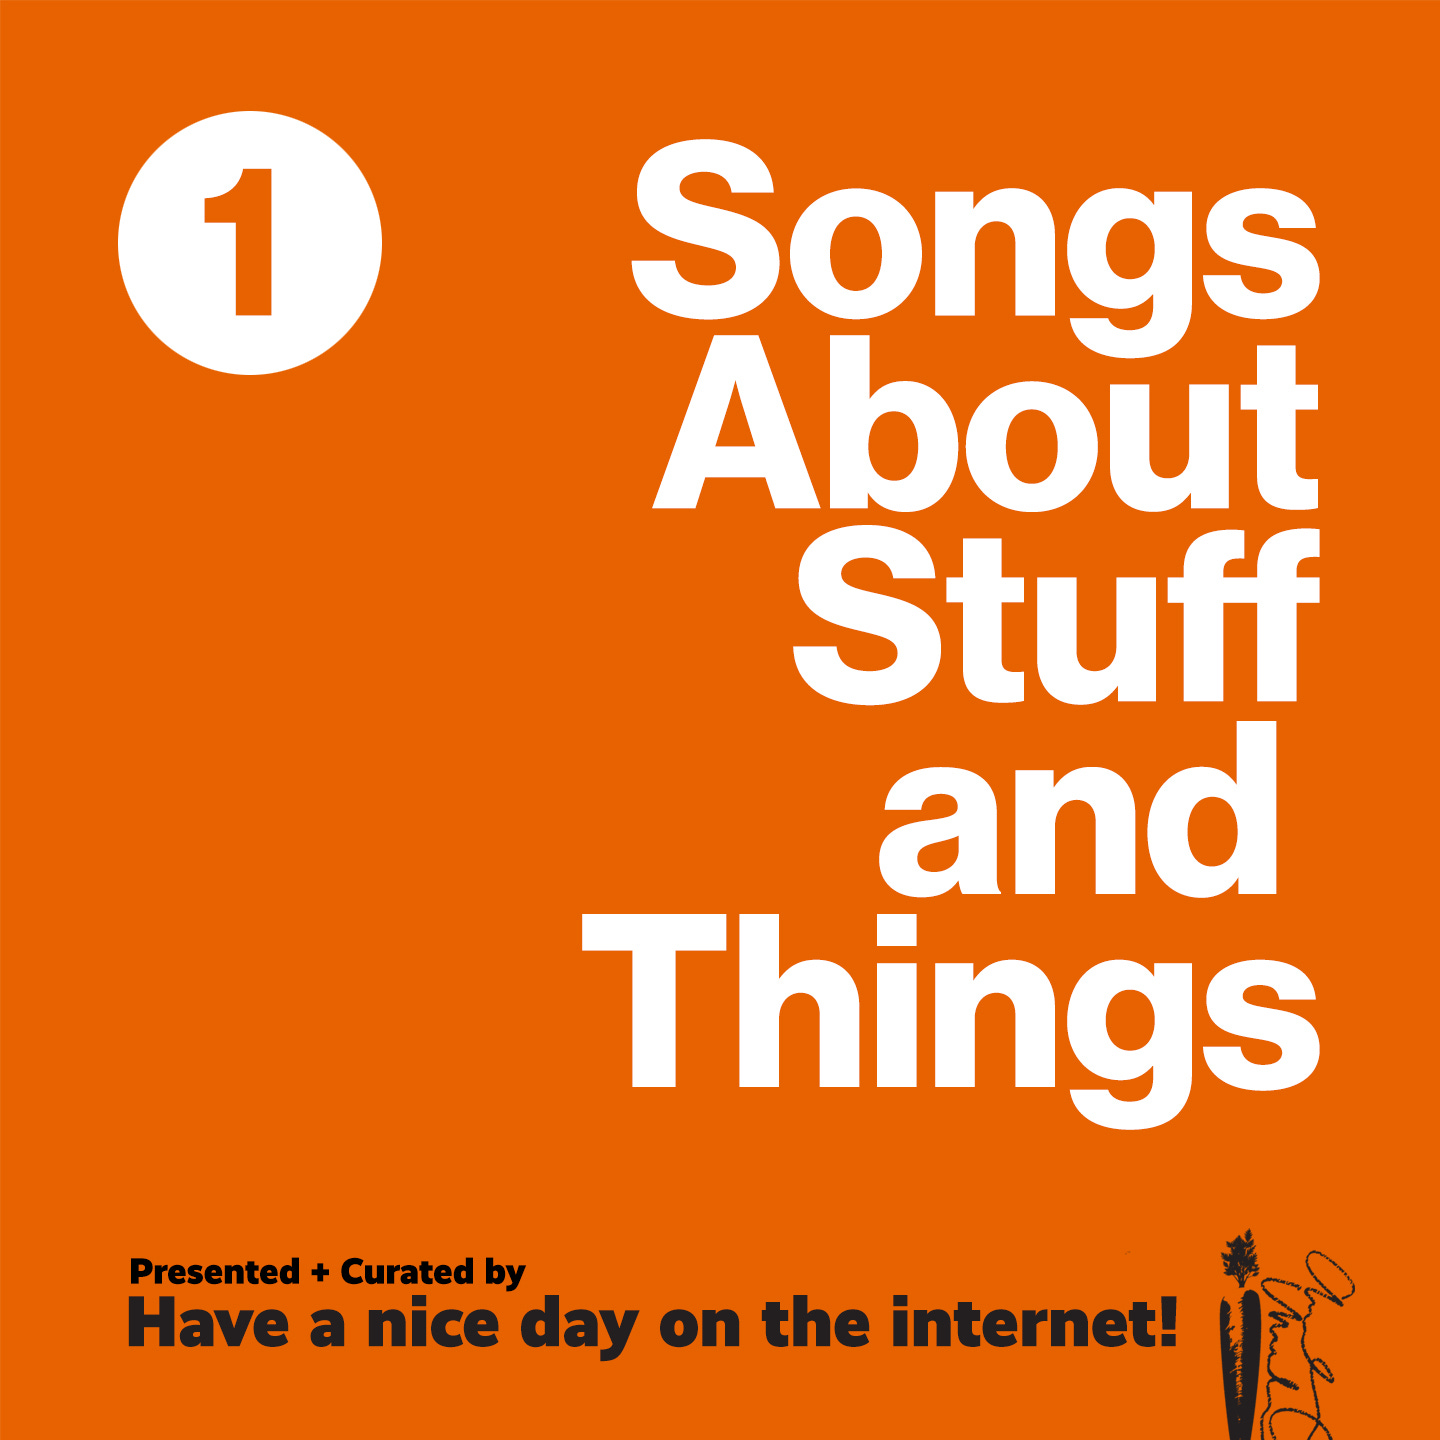 01: Songs About Stuff and Things